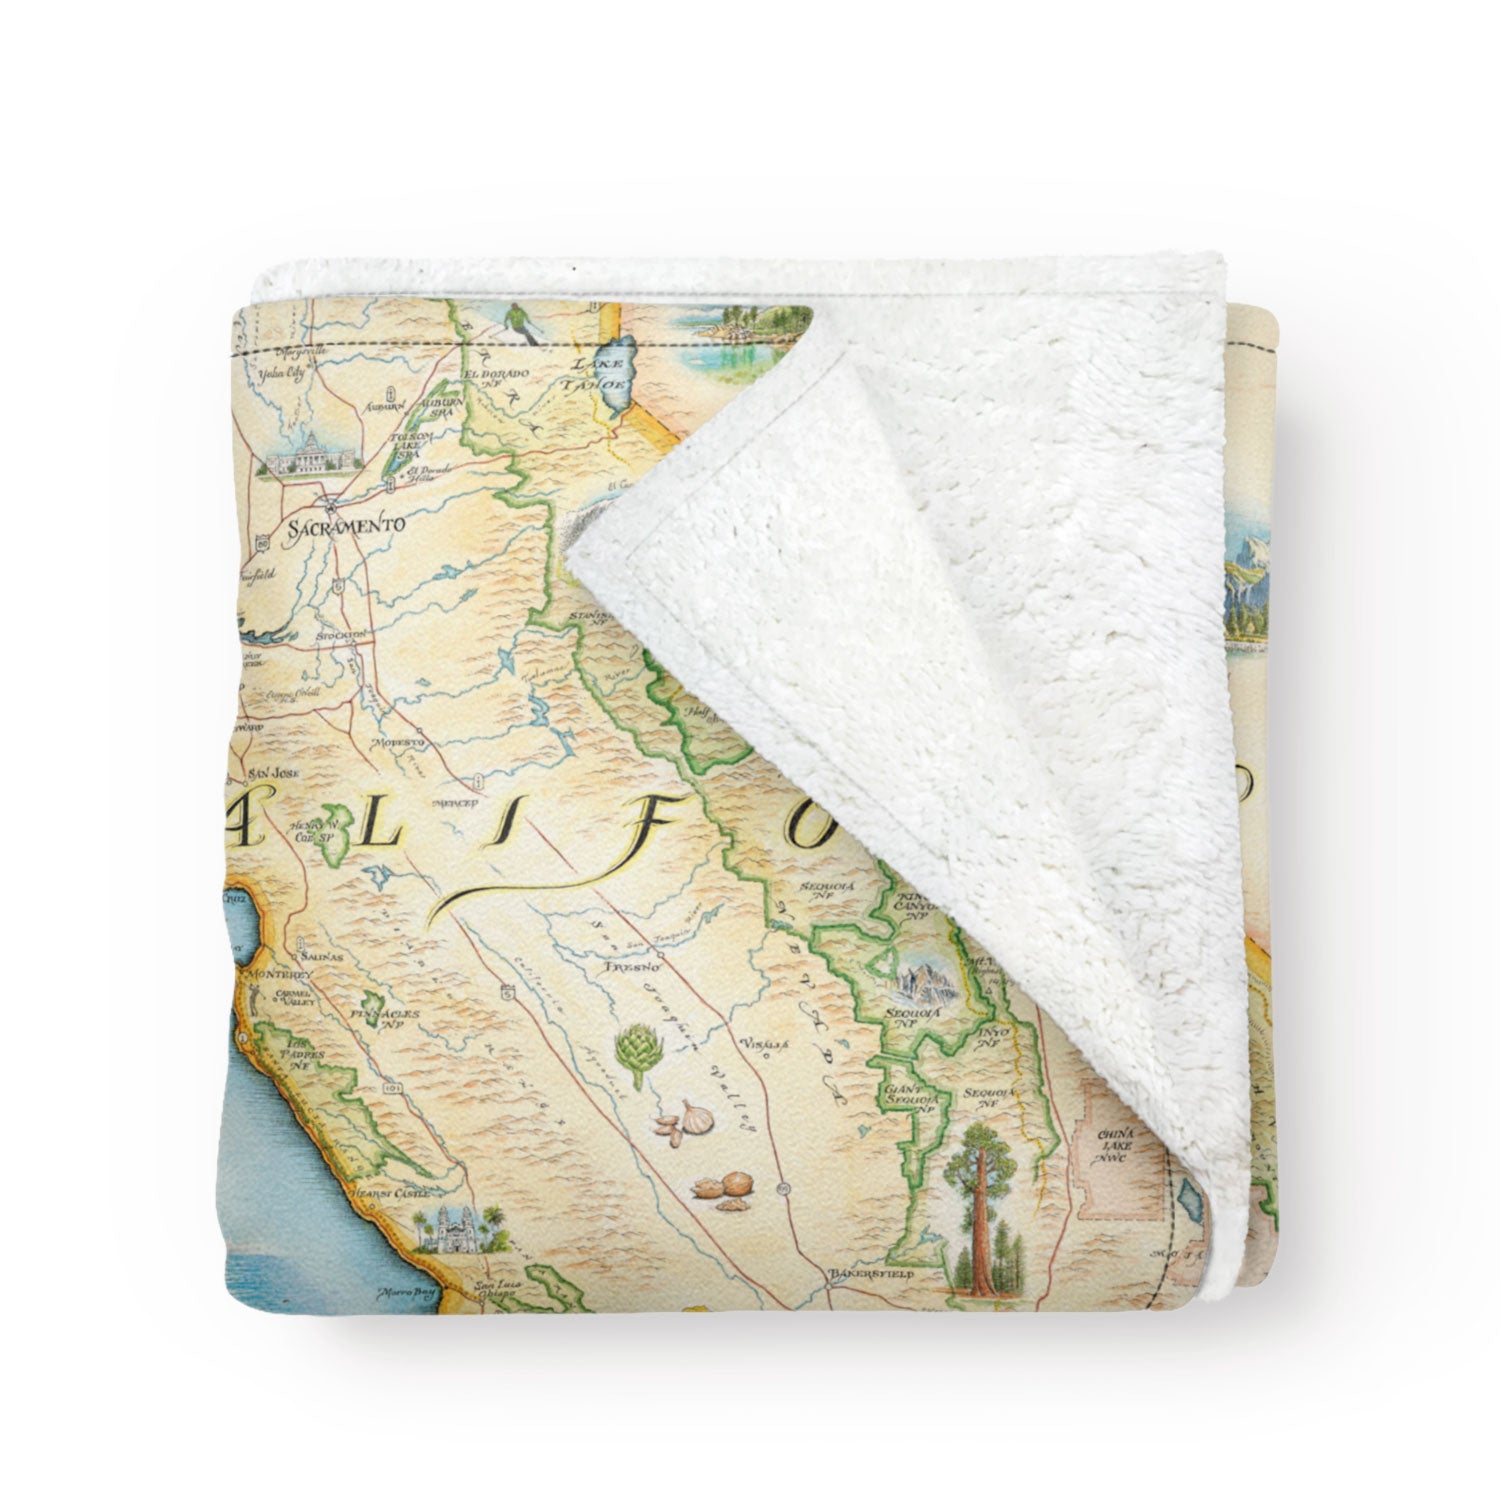 California State Map Fleece Blanket in earth-tones. It features major cities of Sacramento, San Francisco, Los Angeles, San Diego, Hollywood, and more. Aquatic life such as whales, sea turtles, and an abundance of fish species. National Parks and attractions are also illustrated such as Yosemite, Sequoia Disneyland, Redwood Forest, Golden Gate Bridge and Death Valley. 